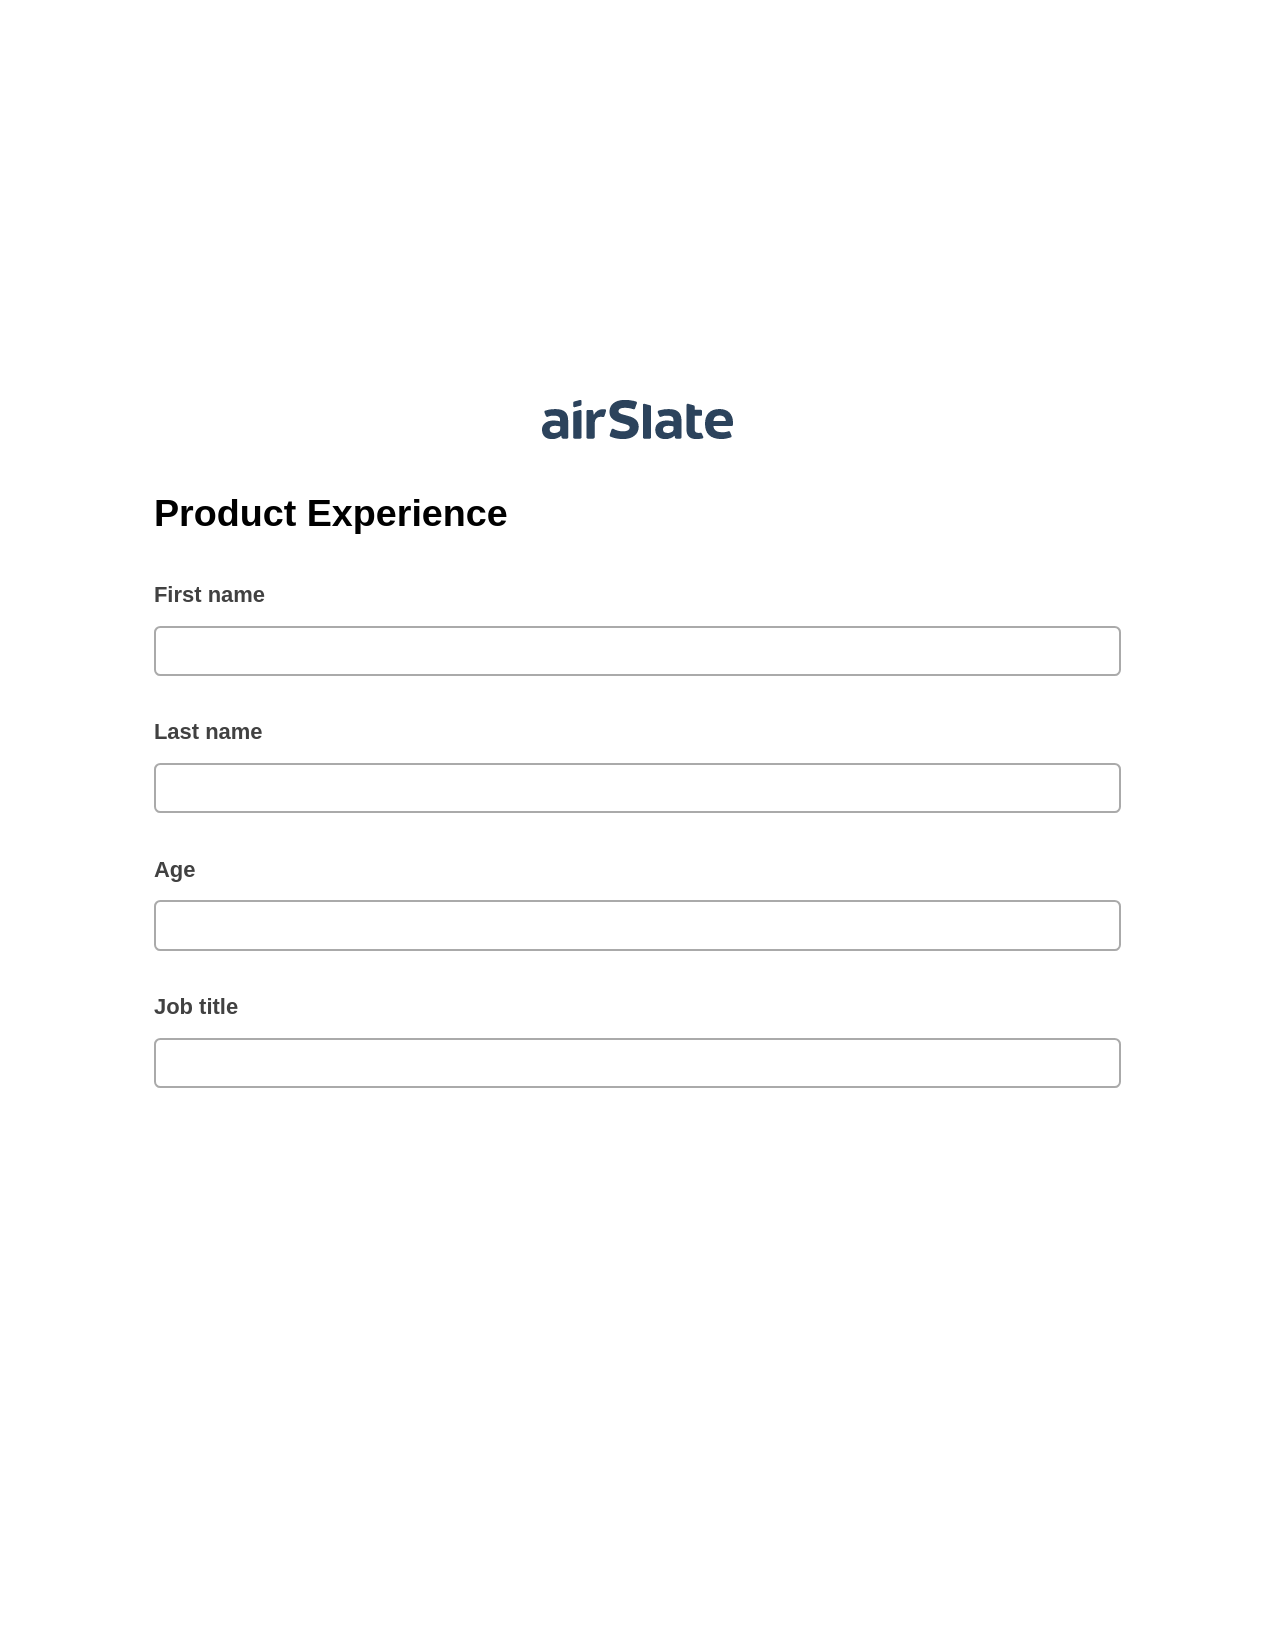 Product Experience Pre-fill from Salesforce Records with SOQL Bot, Add Tags to Slate Bot, Export to Smartsheet